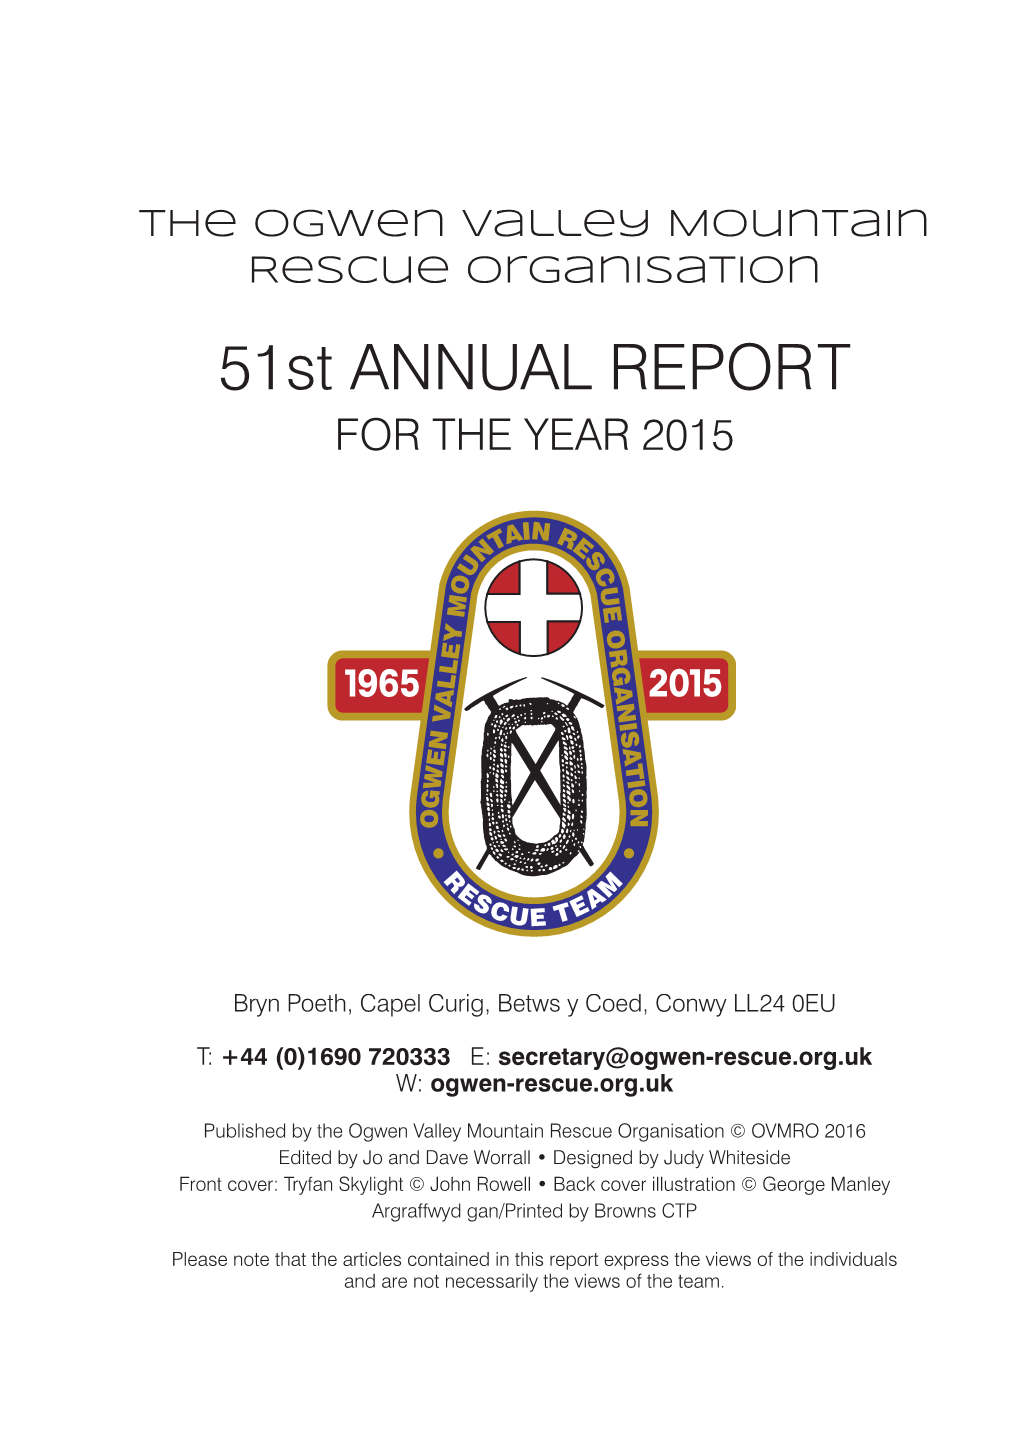 51St ANNUAL REPORT for the YEAR 2015